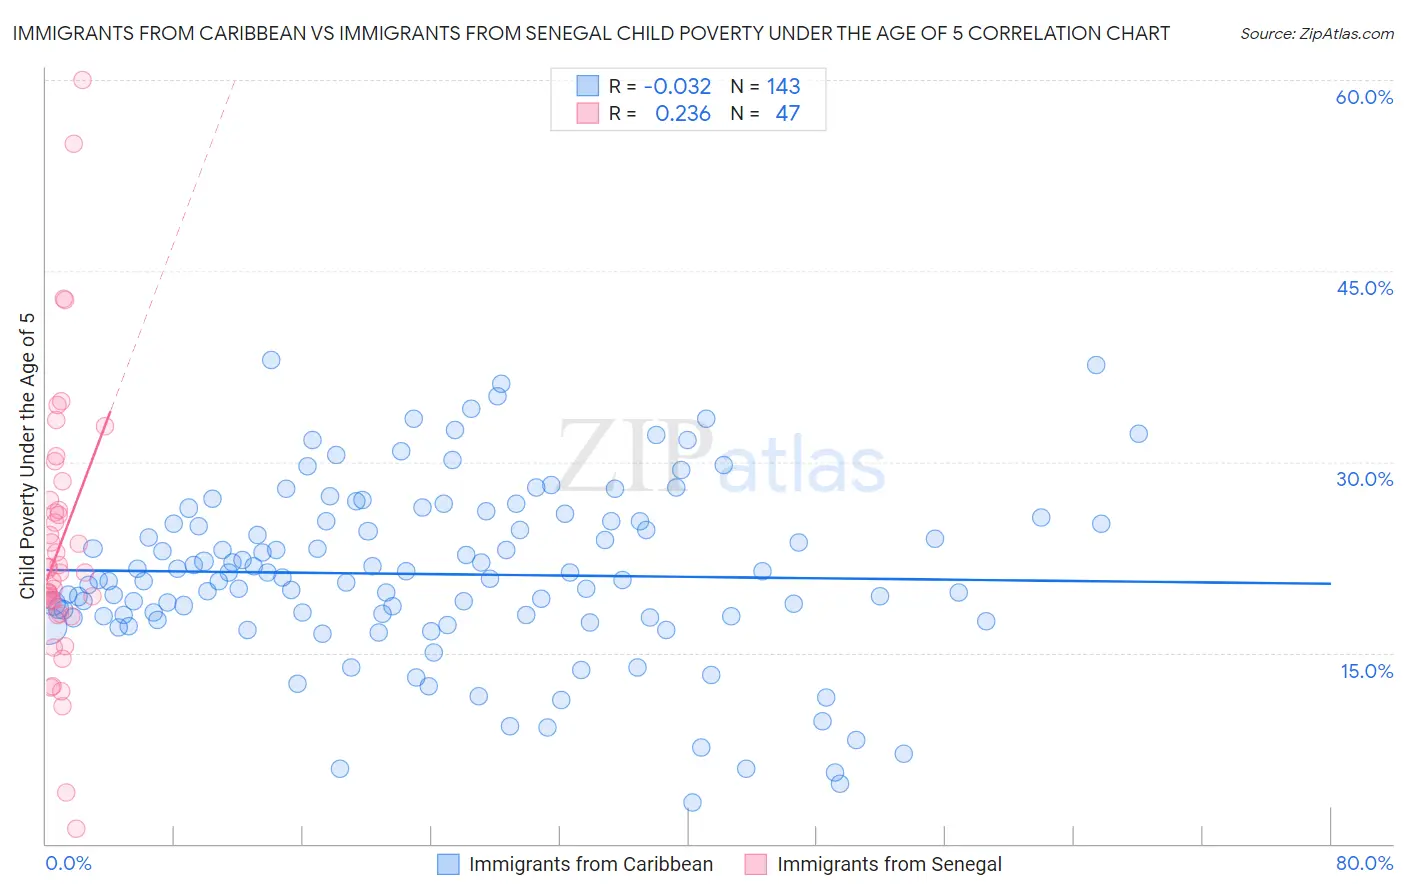 Immigrants from Caribbean vs Immigrants from Senegal Child Poverty Under the Age of 5